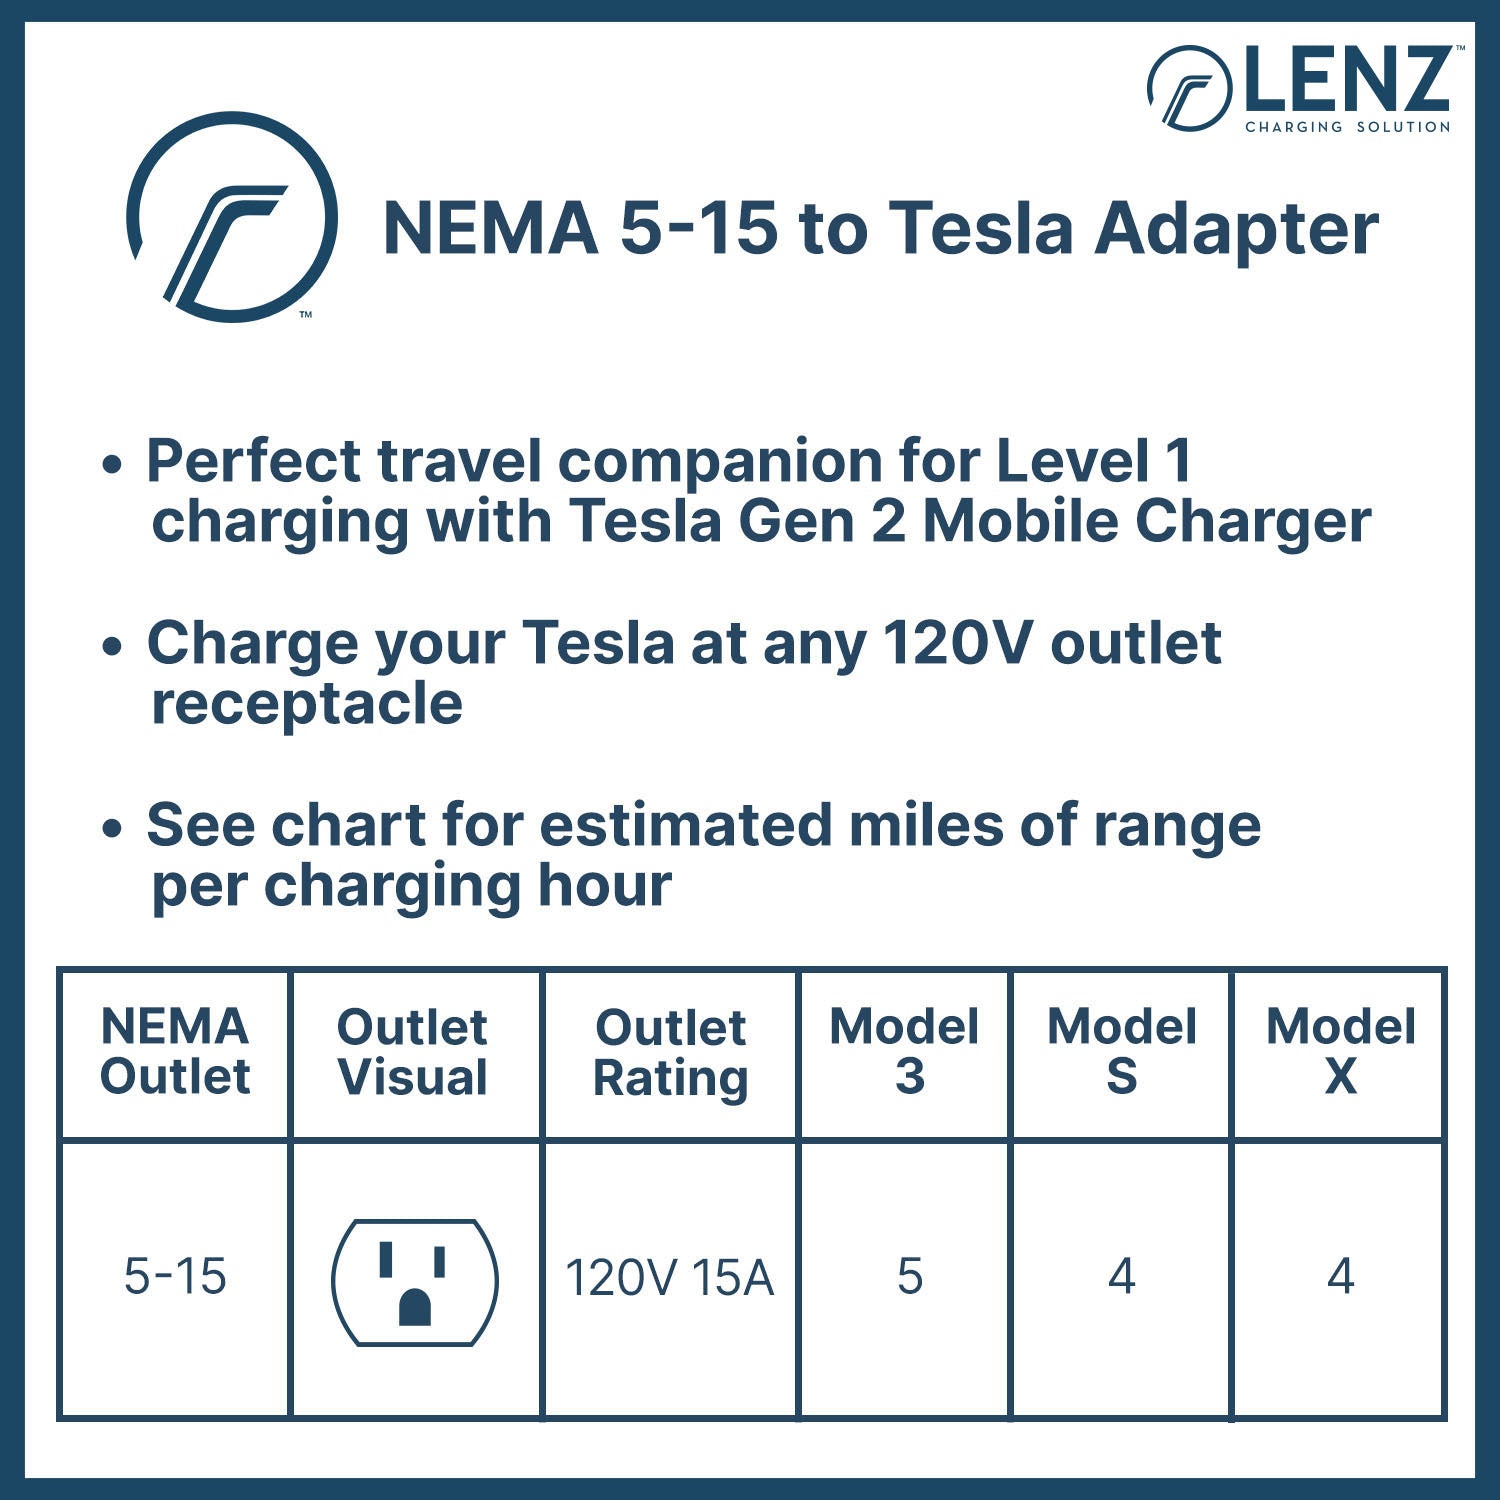 LENZ 5-15 NEMA Adapter plugs into 120v standard household outlet and connects to Gen 2 Tesla Mobile Connector